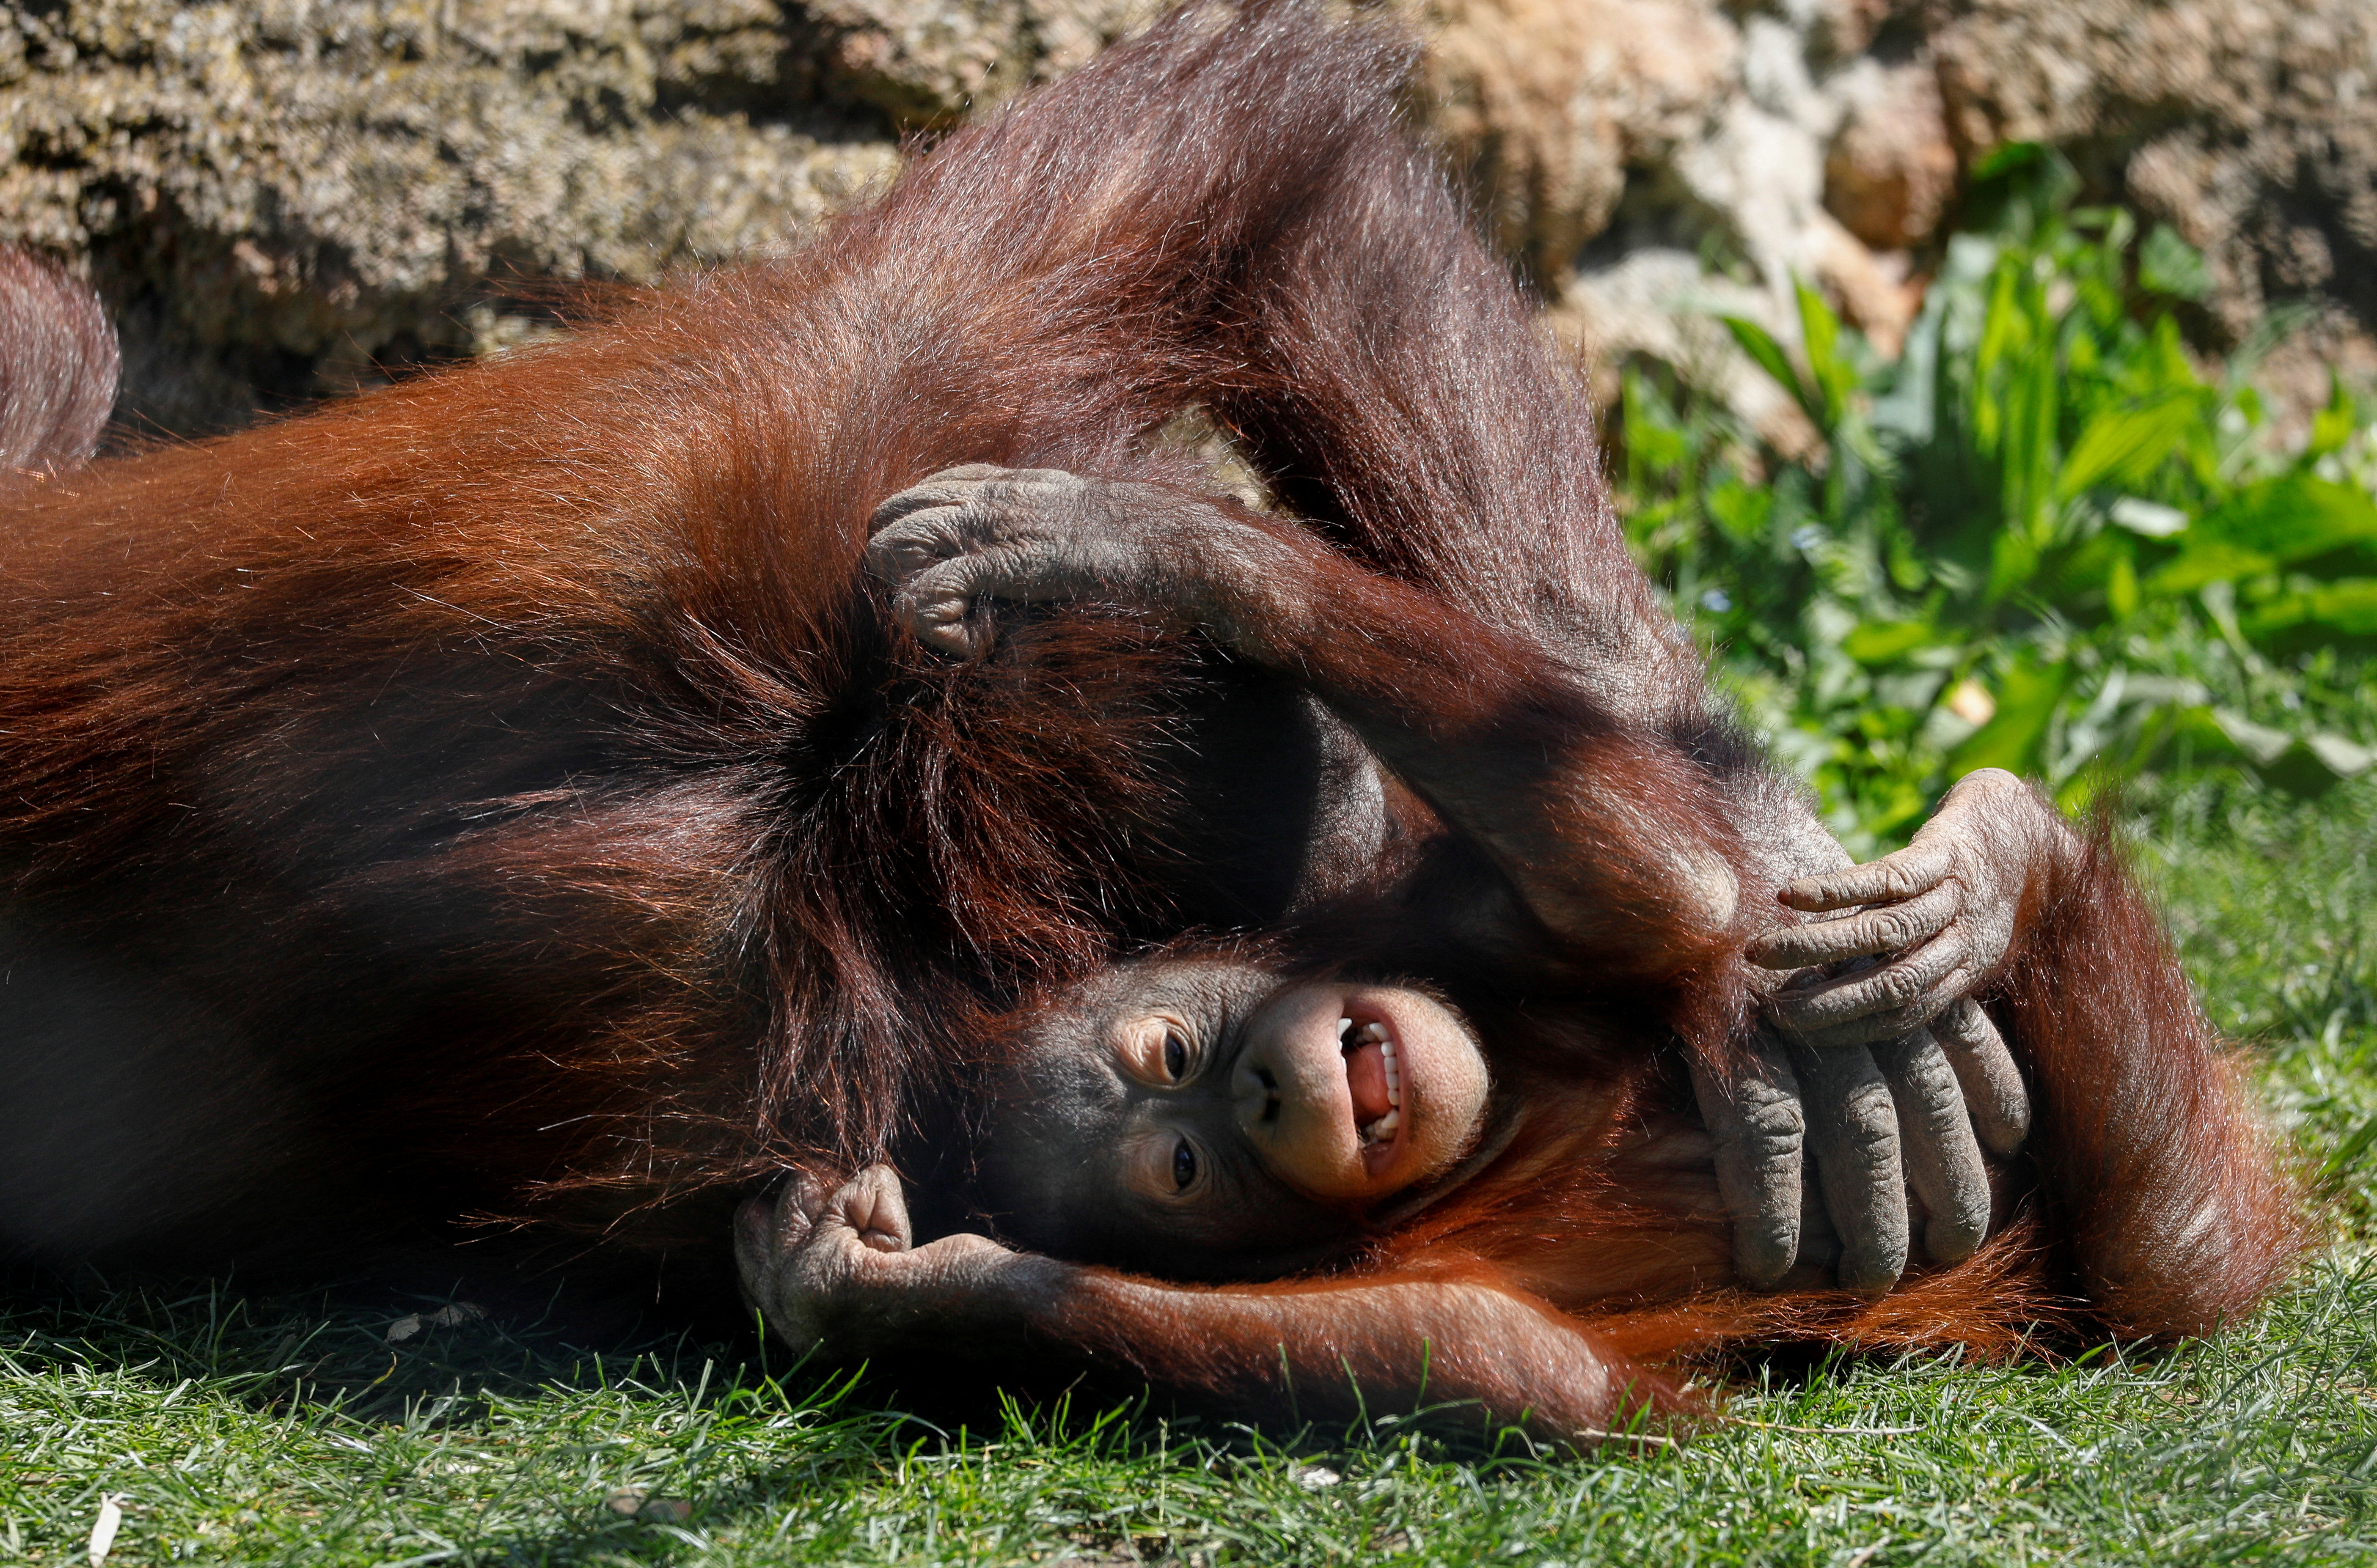 Sabah, a baby female Bornean orangutan, plays with her mother Surya in their enclosure at the Madrid zoo